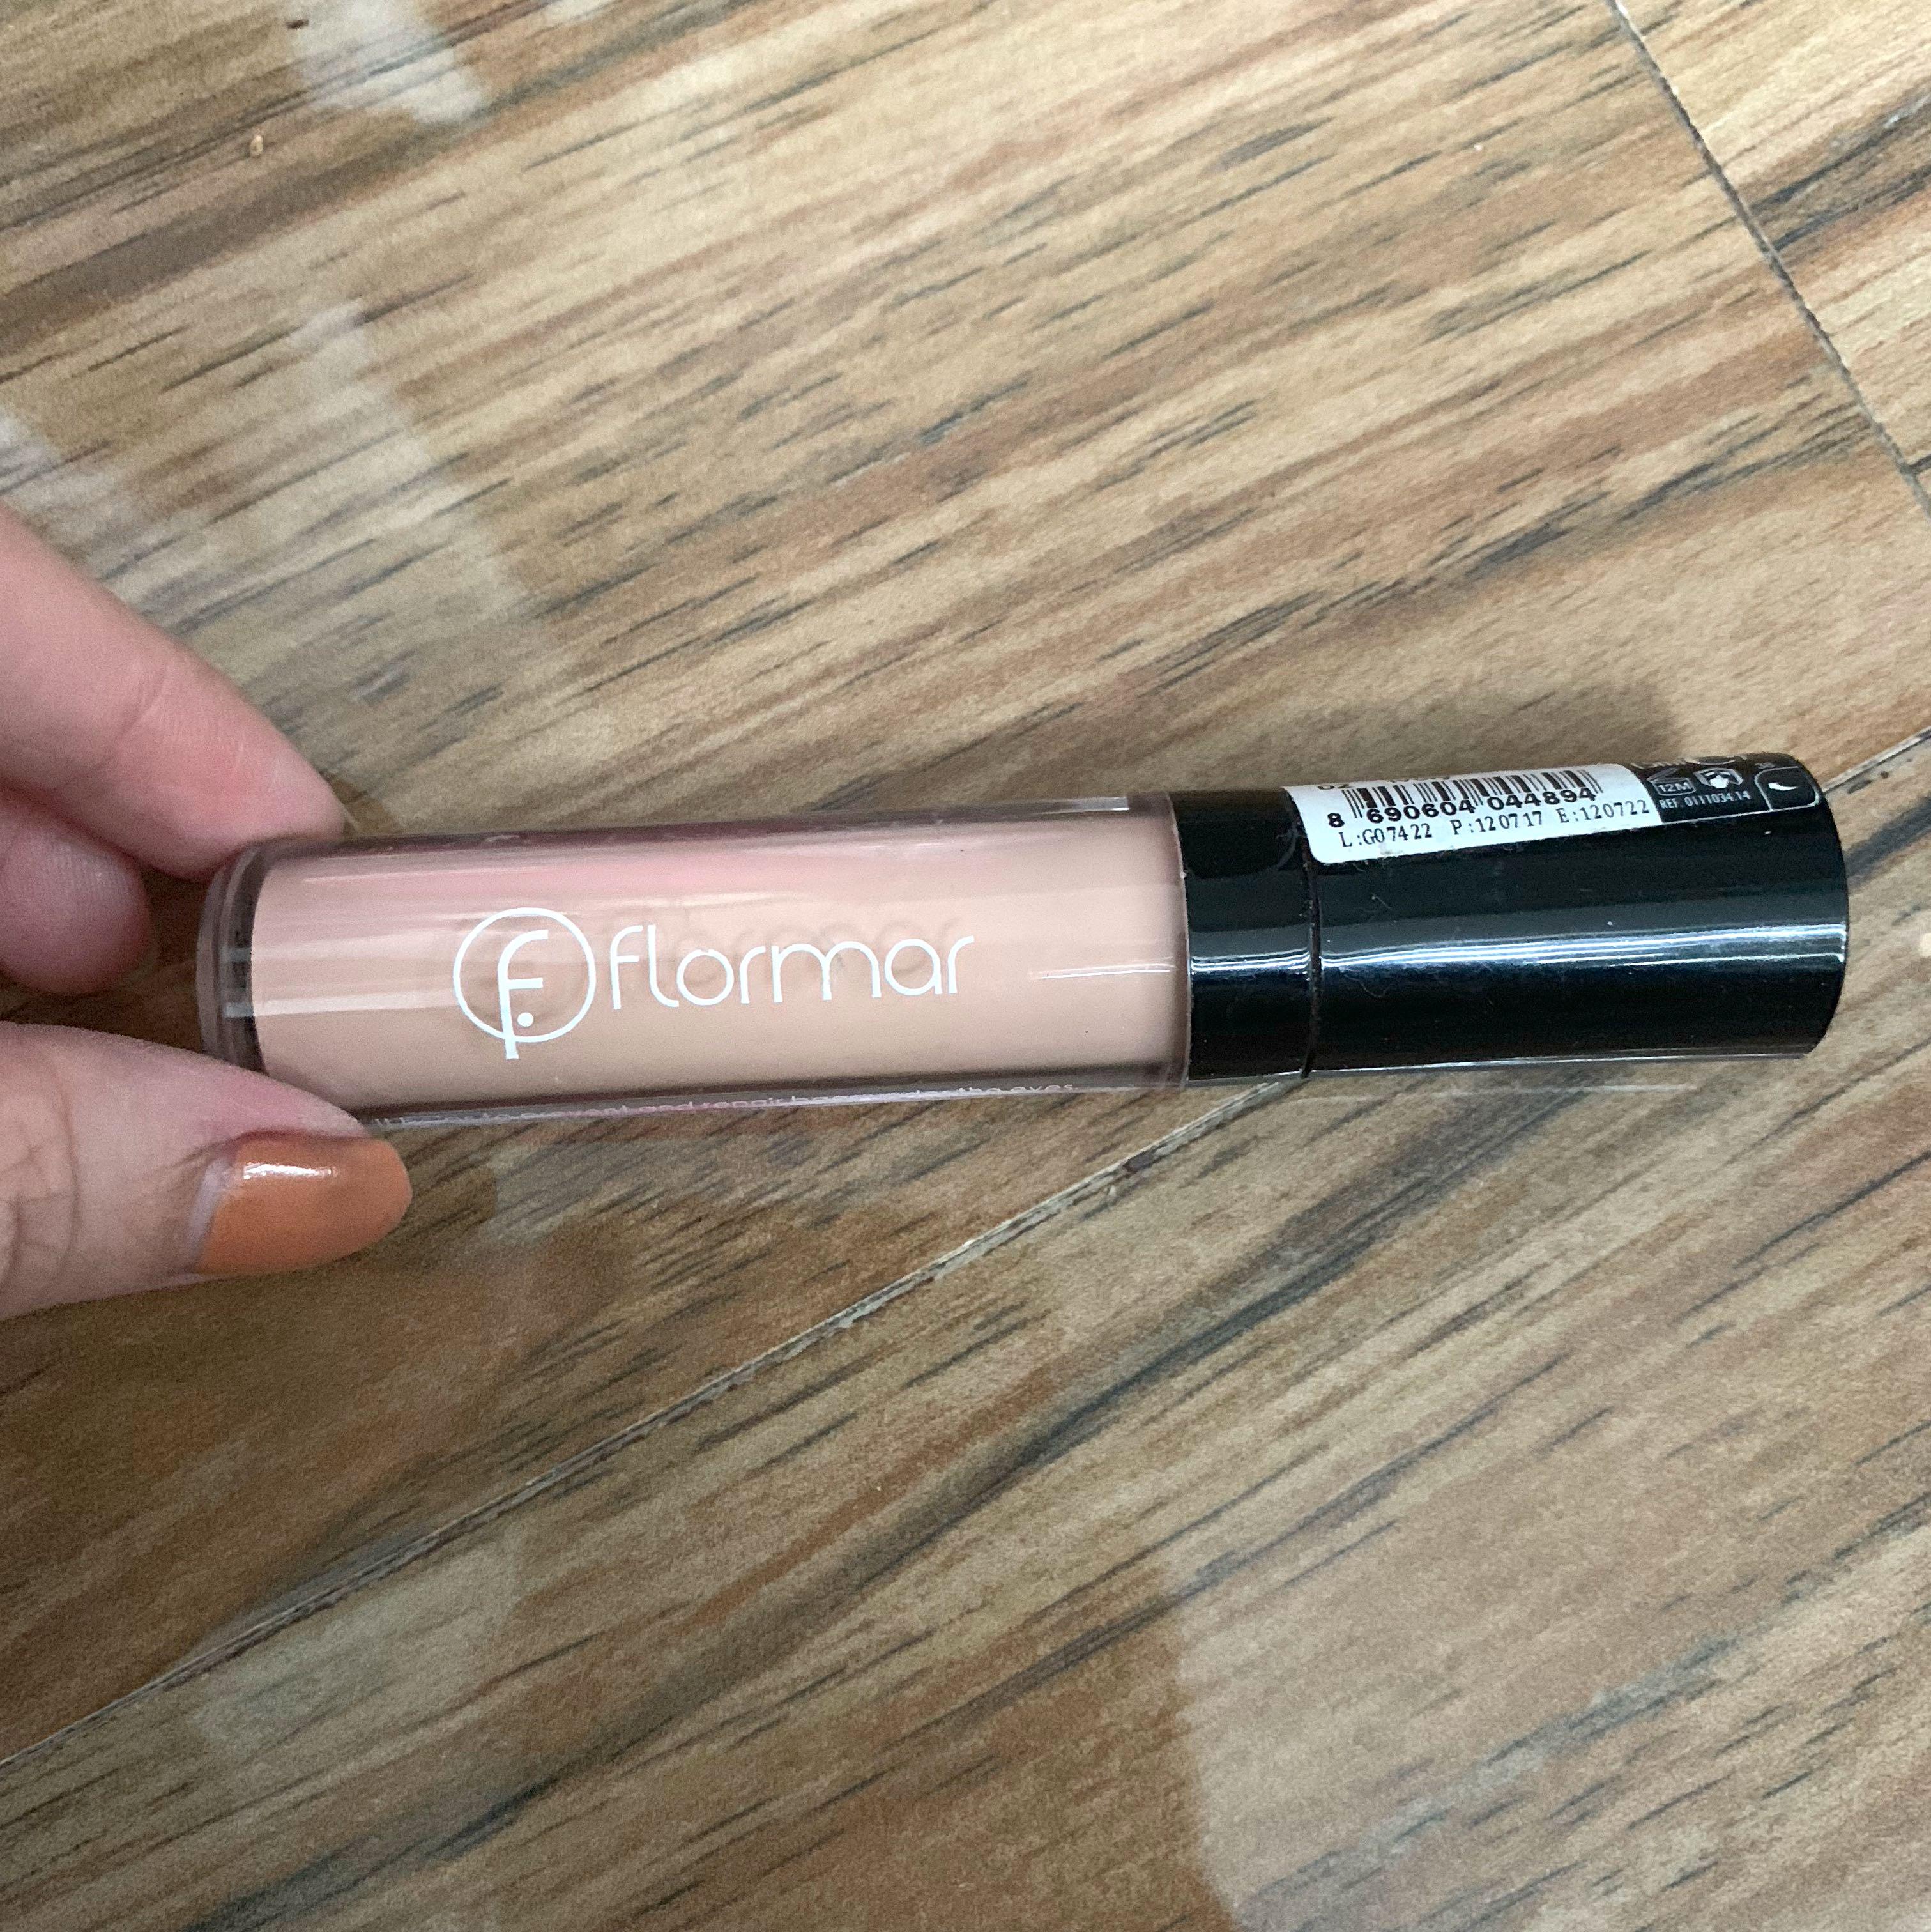 Flormar Perfect Coverage Liquid Concealer - Ivory price in Egypt, Jumia  Egypt